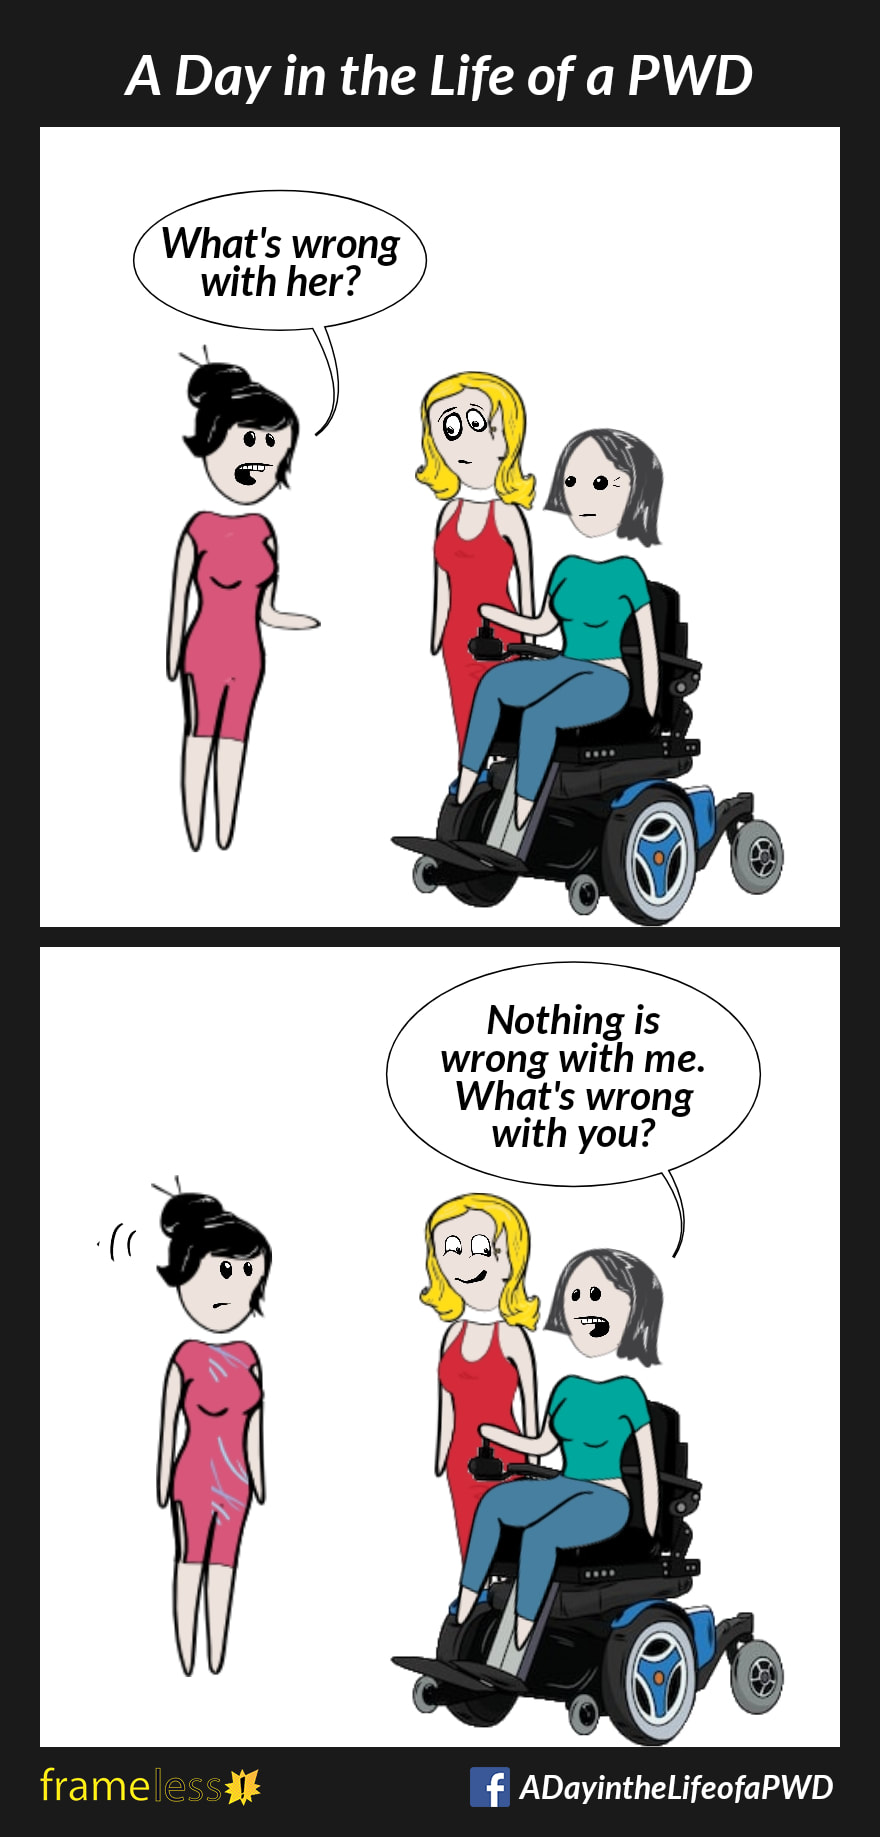 COMIC STRIP 
A Day in the Life of a PWD (Person With a Disability) 

Frame 1:
A power wheelchair user and her friend are approached by a stranger. 
STRANGER (to friend): What's wrong with her?
WHEELCHAIR USER: Nothing is wrong with me. What's wrong with you?